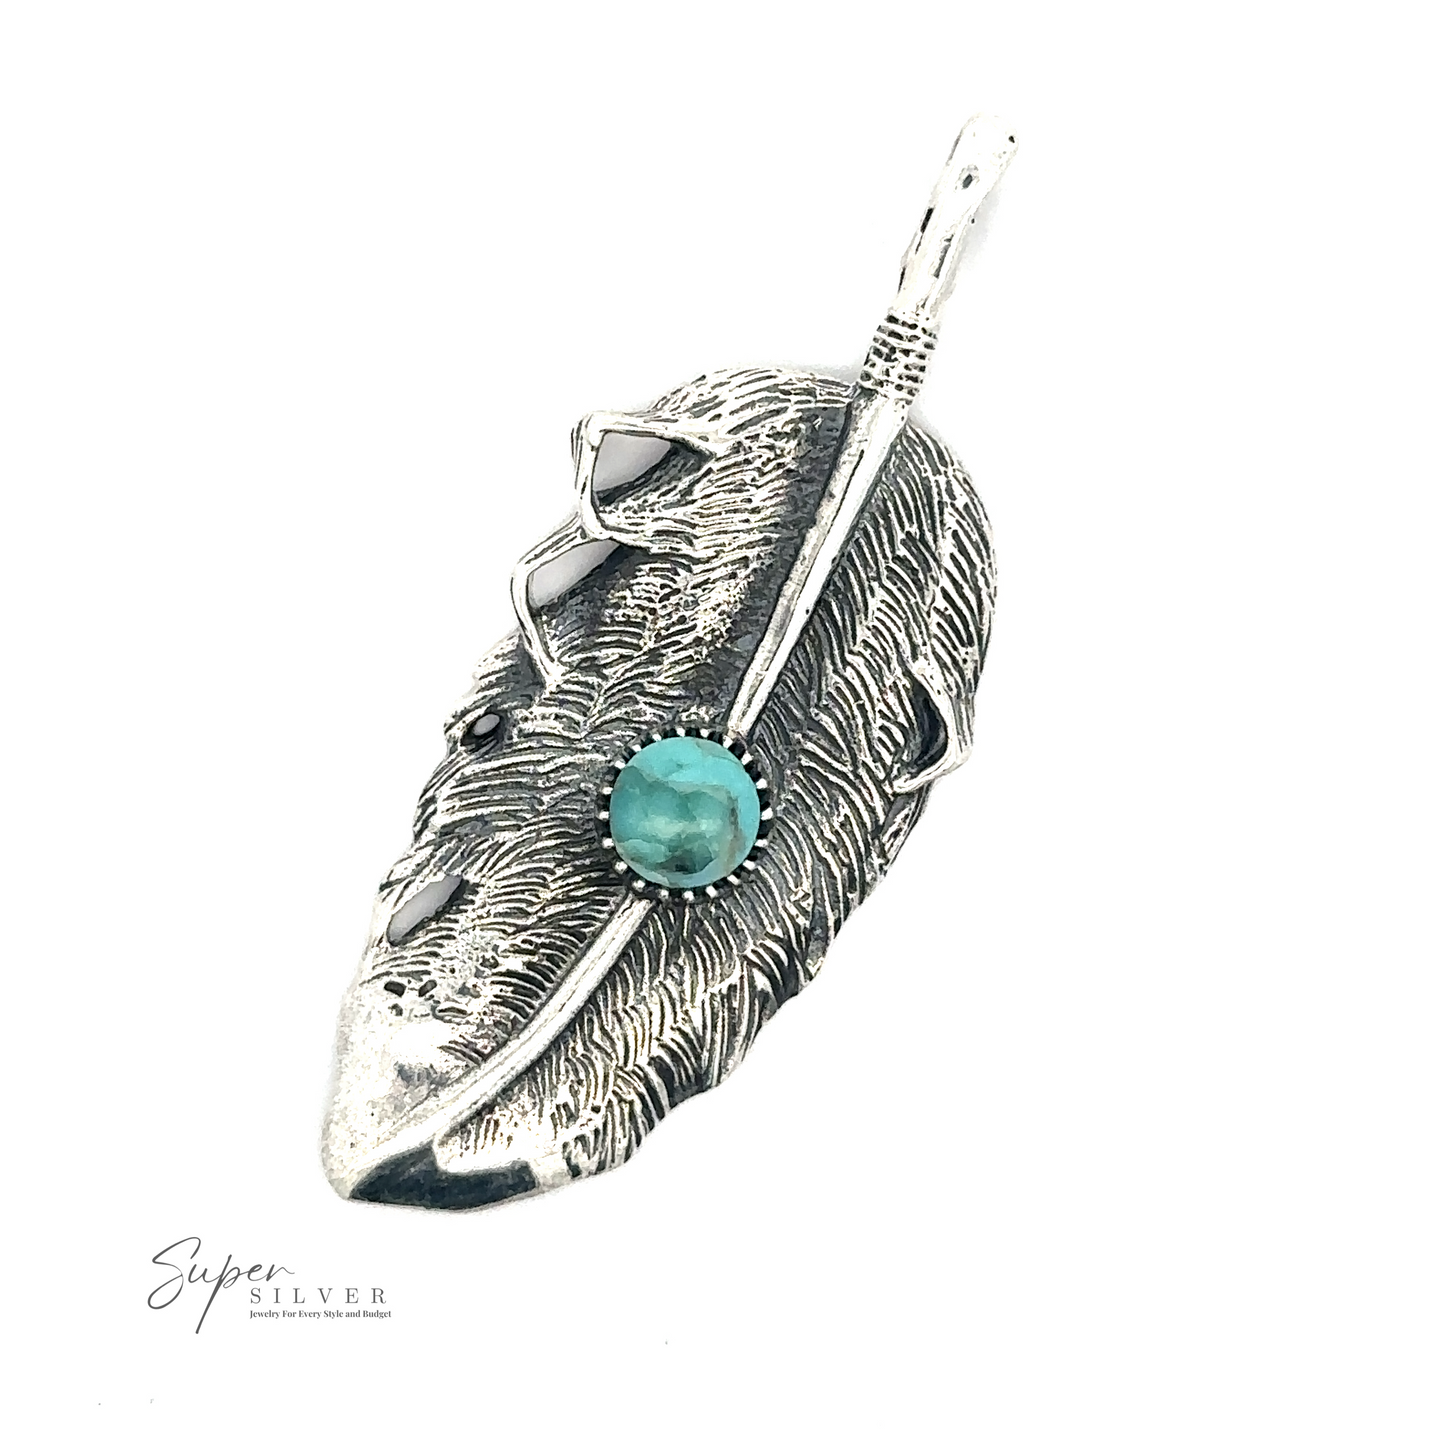 
                  
                    A Native Inspired Feather Pendant With Turquoise with intricate details and a natural turquoise stone in the center. The brand name "Super Silver" is visible in the bottom left corner, adding to its allure.
                  
                